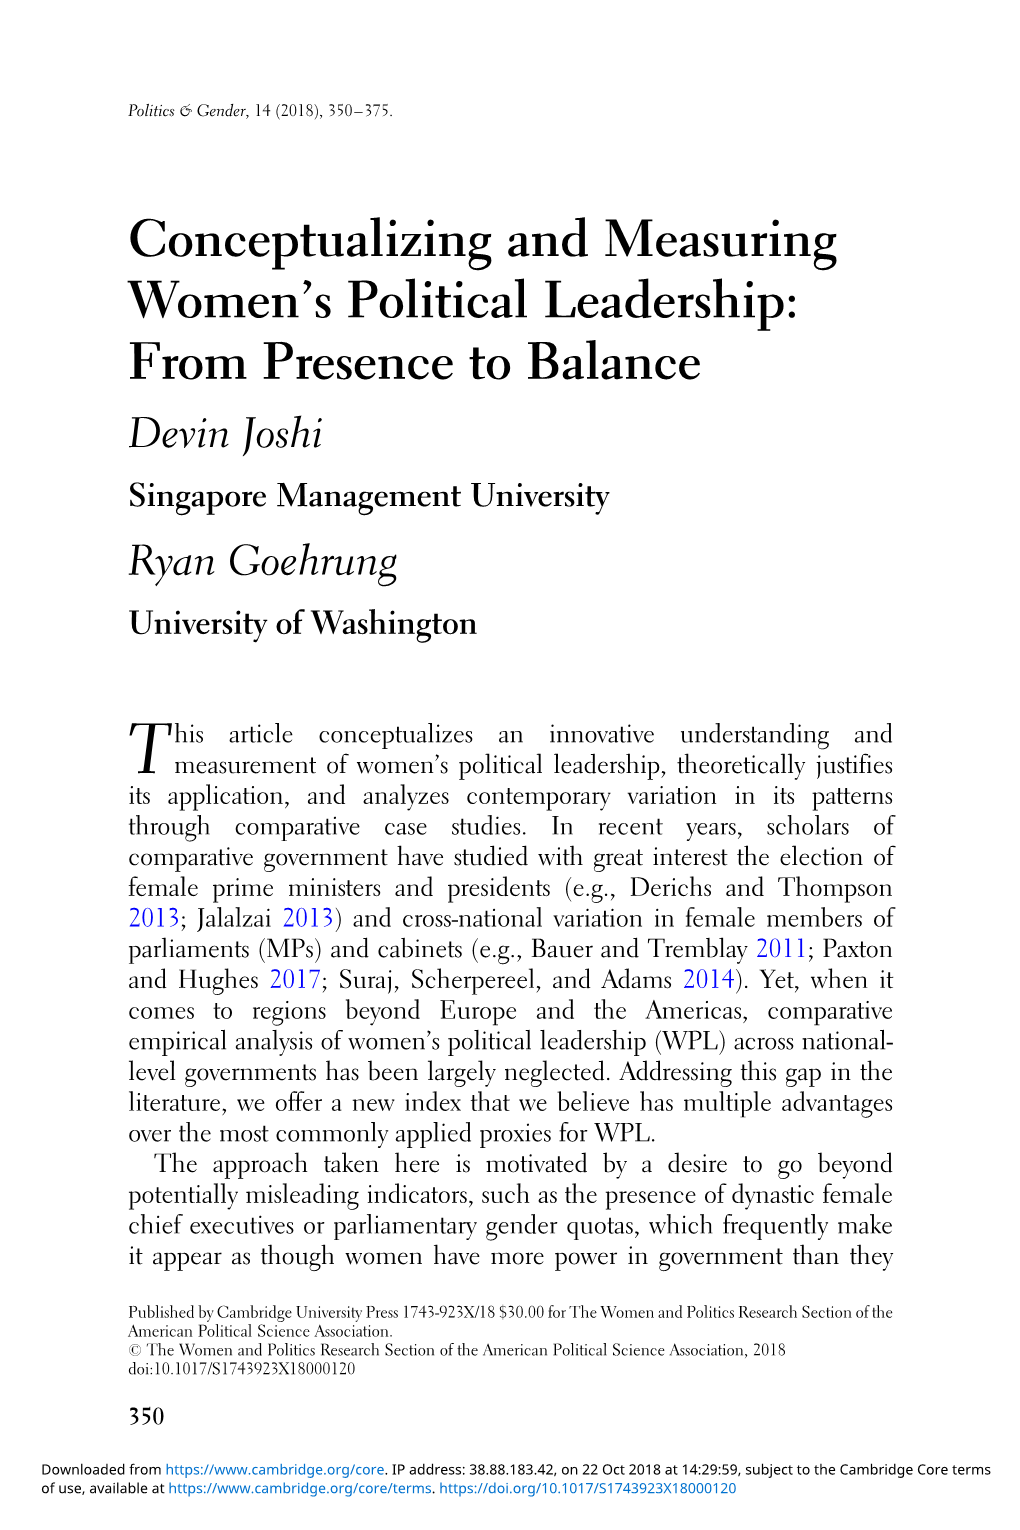 Conceptualizing and Measuring Women's Political Leadership